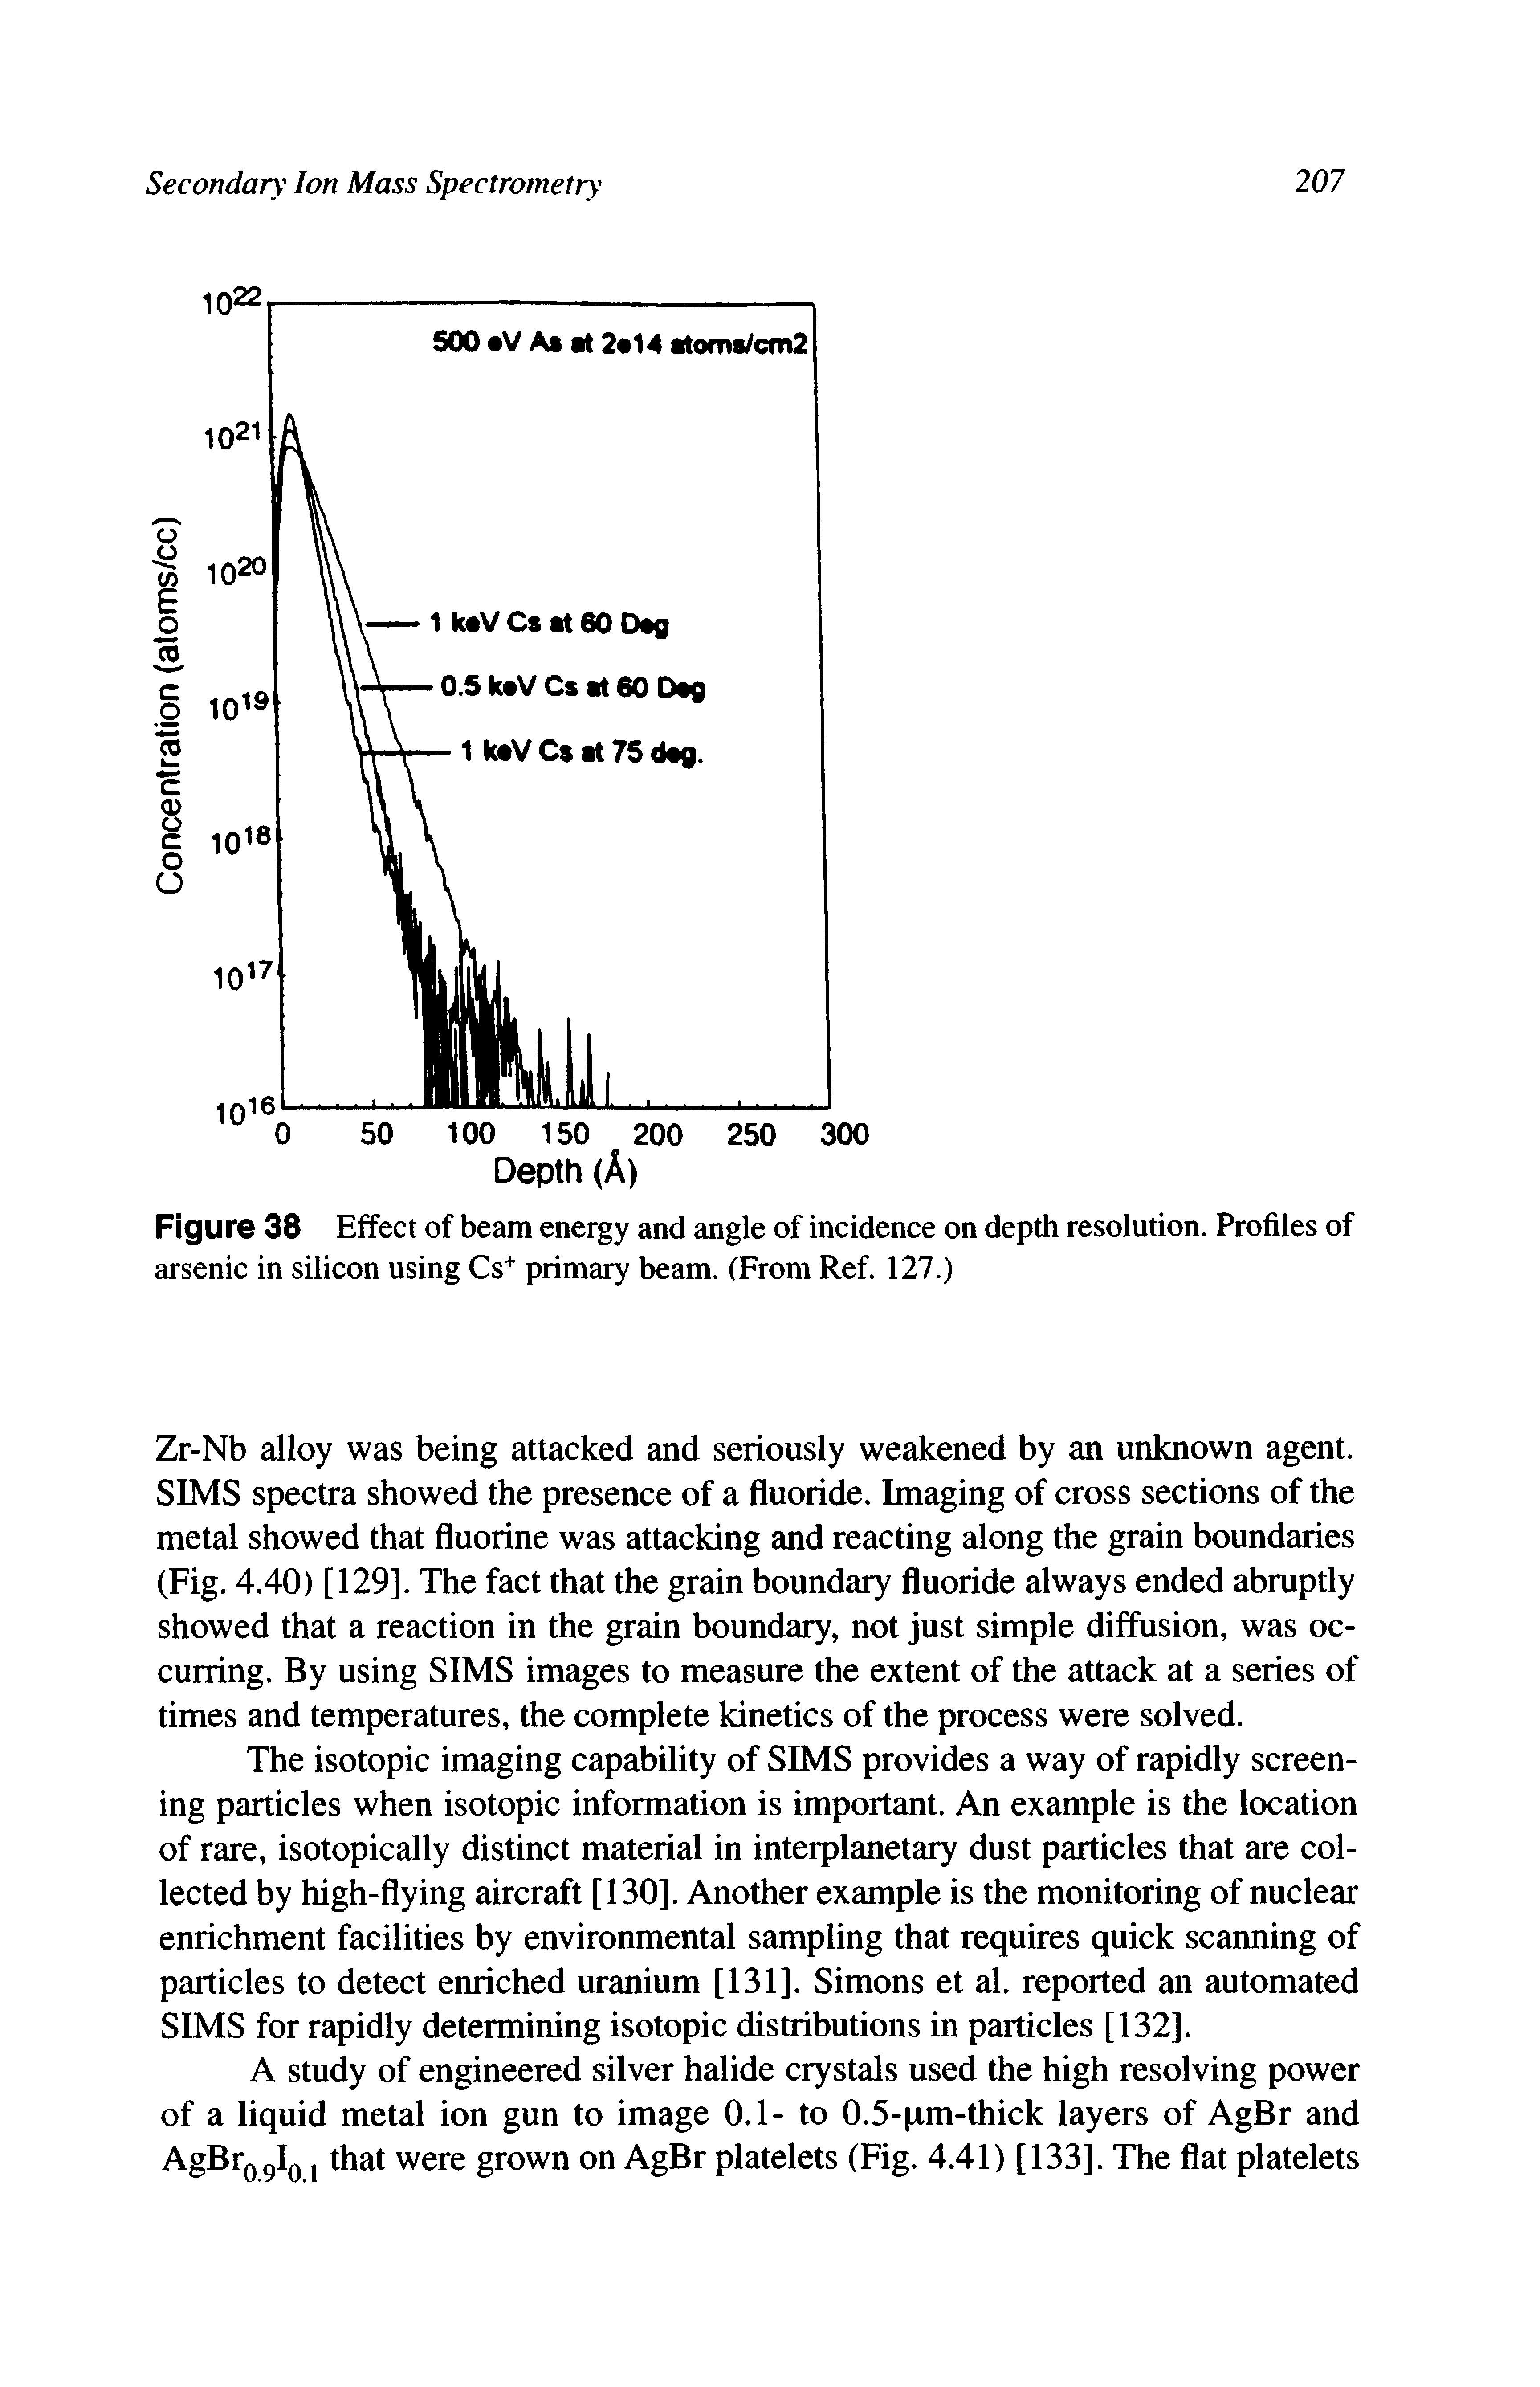 Figure 38 Effect of beam energy and angle of incidence on depth resolution. Profiles of arsenic in silicon using Cs+ primary beam. (From Ref. 127.)...